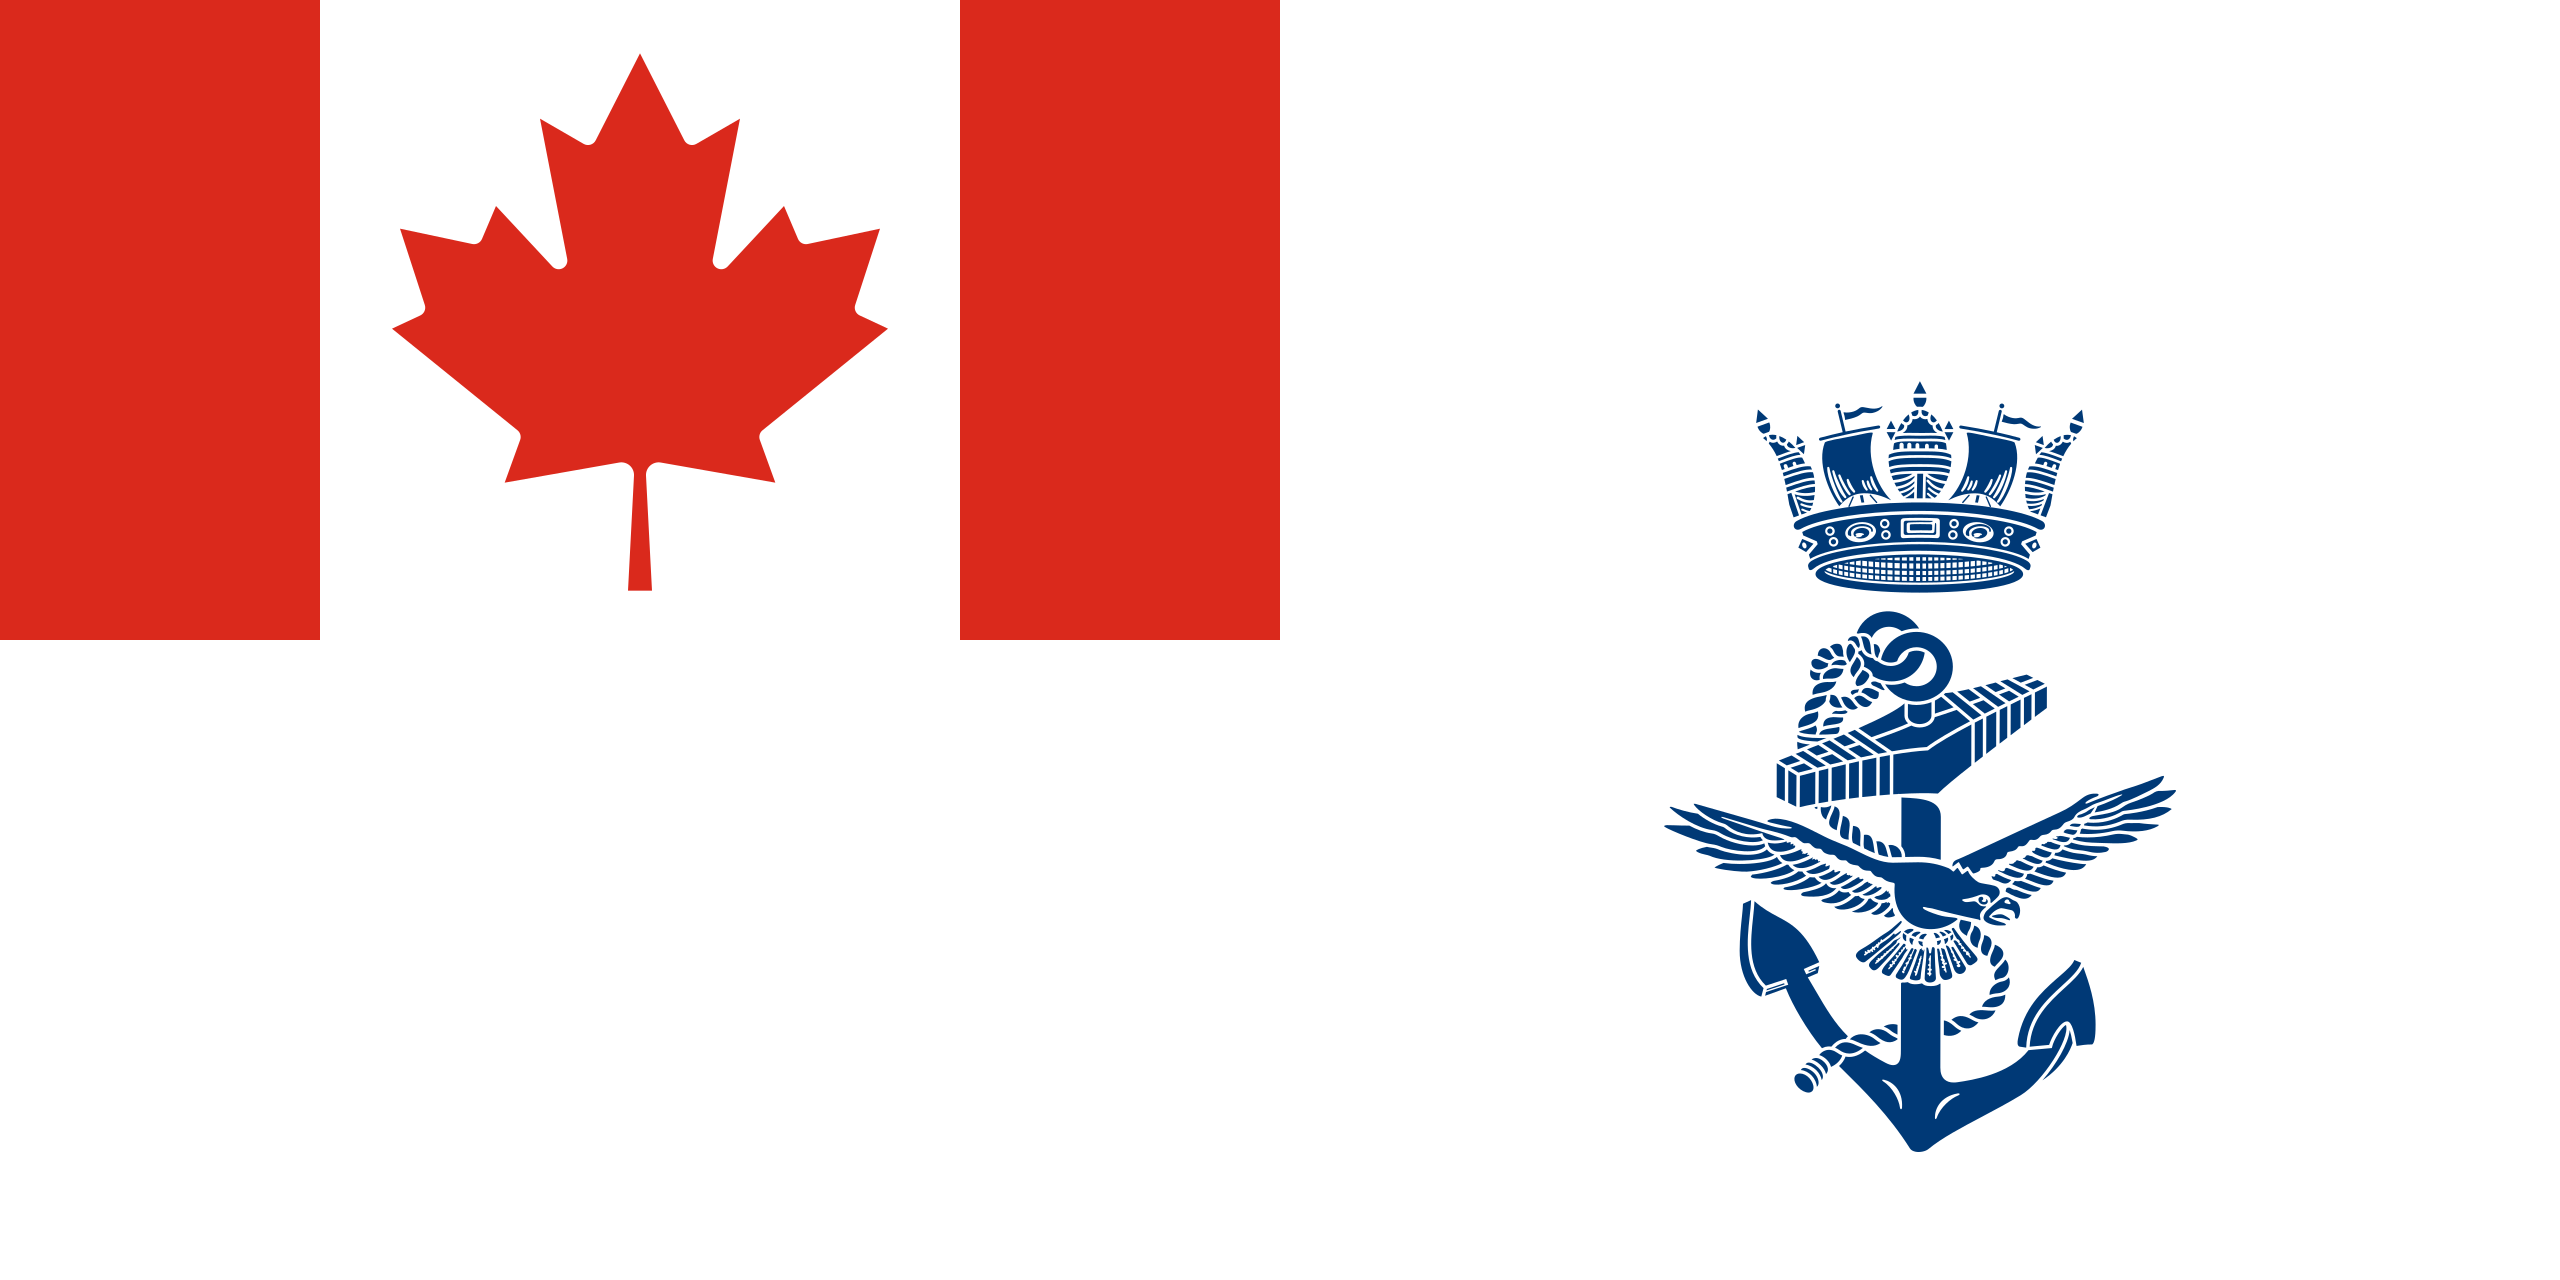 Depiction of the Naval Jack of Canada